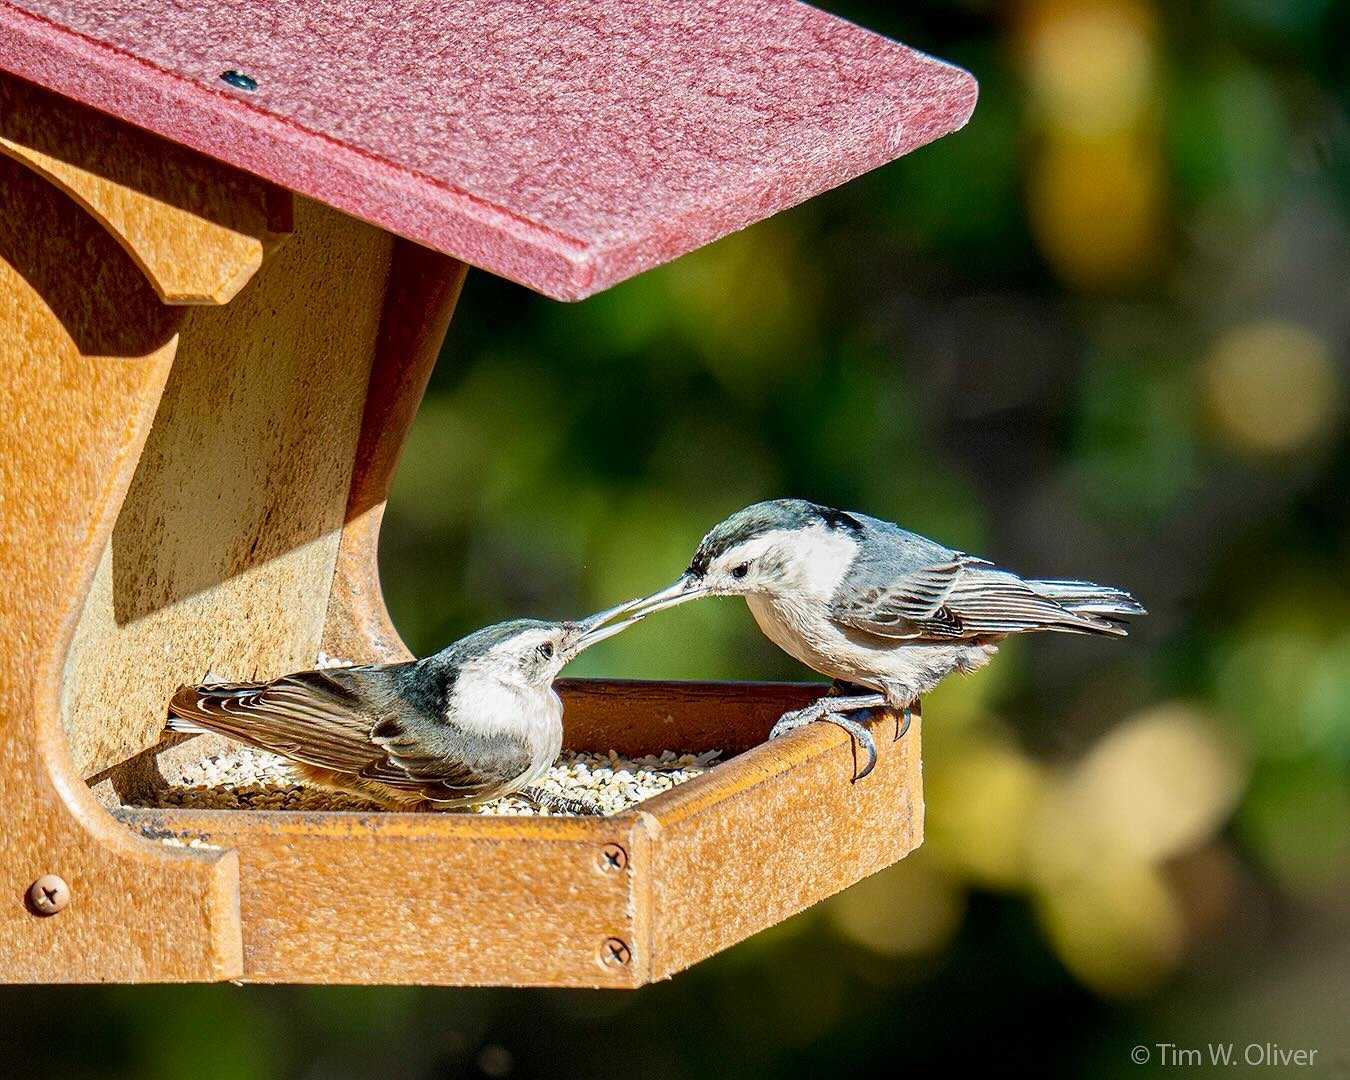 A shared meal at the feeder between white-breasted nuthatches. Captured using the OM-1 Mark II with M.Zuiko 150-600mm f5-6.3 IS lens @ 600mm (1200mm full-frame equivalent) using a monopod.
.
@omsystem.cameras
.
#nuthatch #nuthatches #nuthatchesofinst